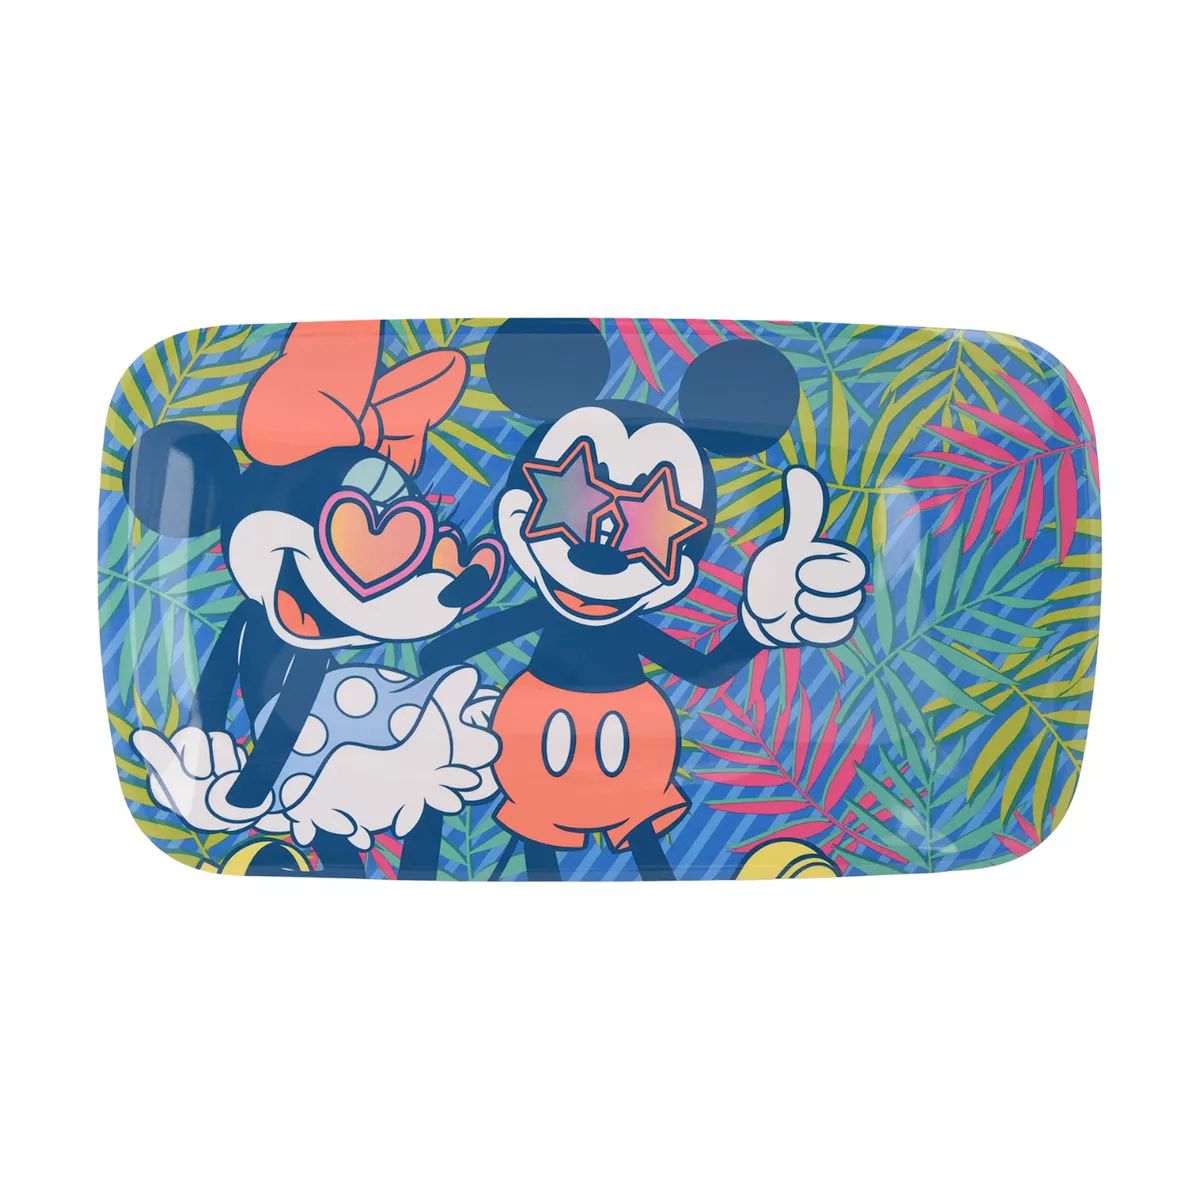 Celebrate Together™ Disney Mickey Mouse & Minnie Mouse Sunglasses Summer Treat Tray | Kohl's